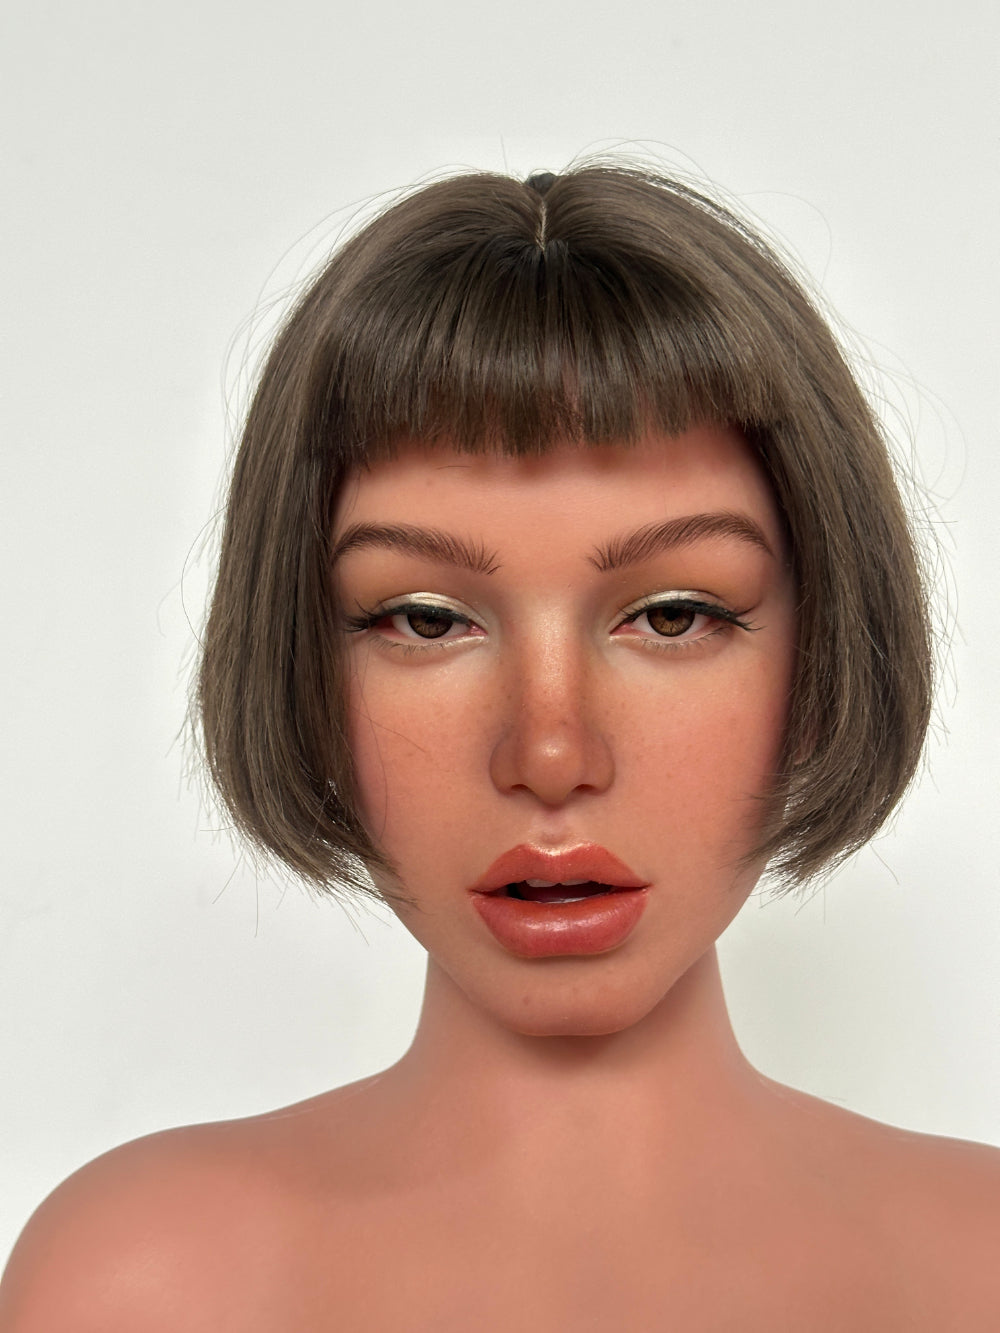 Zelex Doll SLE Series 165 cm D Silicone - ZXE219-2 Movable Jaw